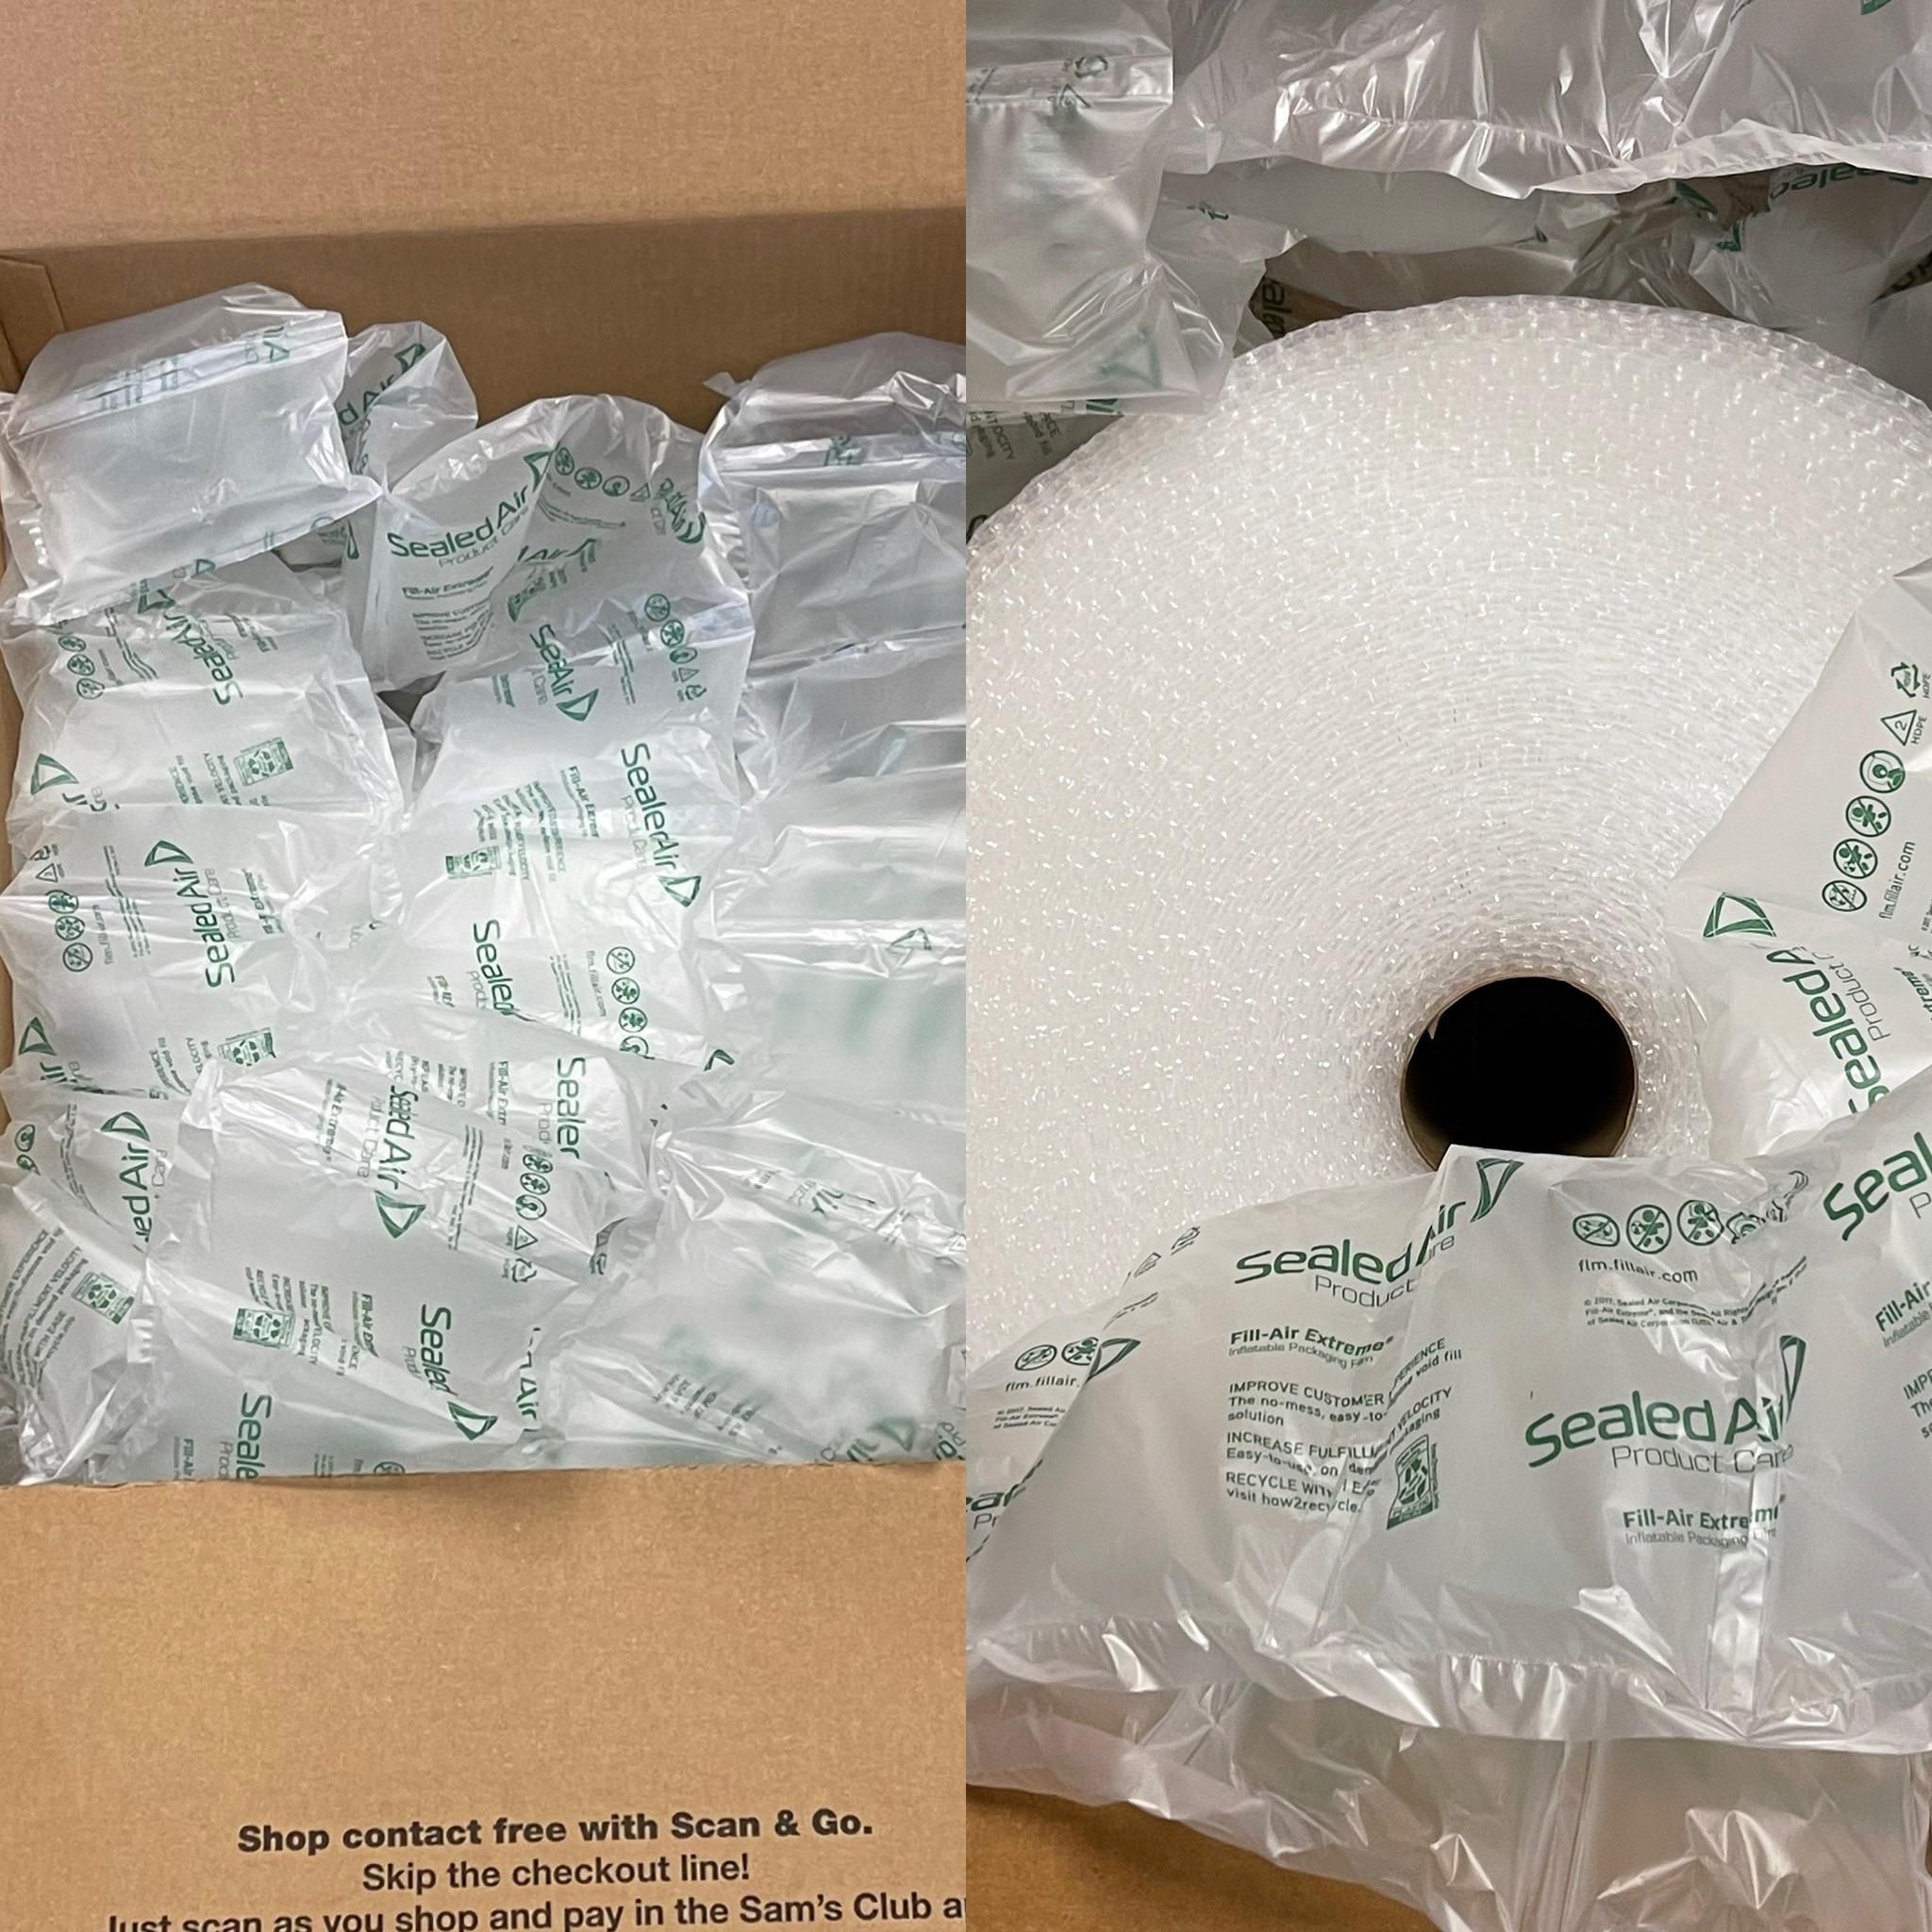 My co-worker ordered Bubble Wrap online & this is how it was shipped…